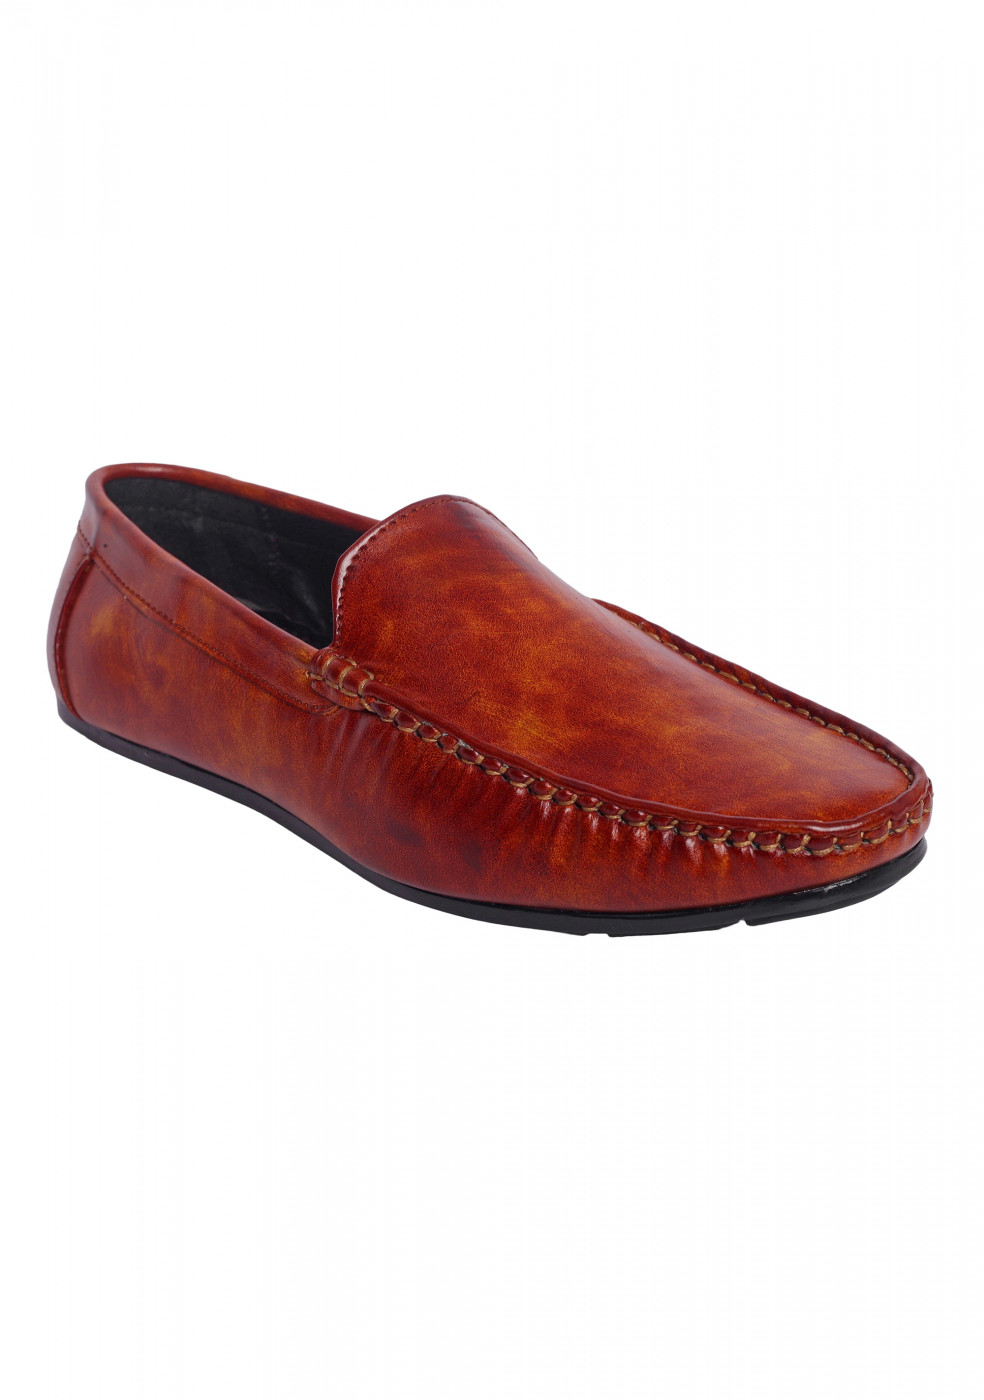 XSTOM Stylish TAN Loafers For Men